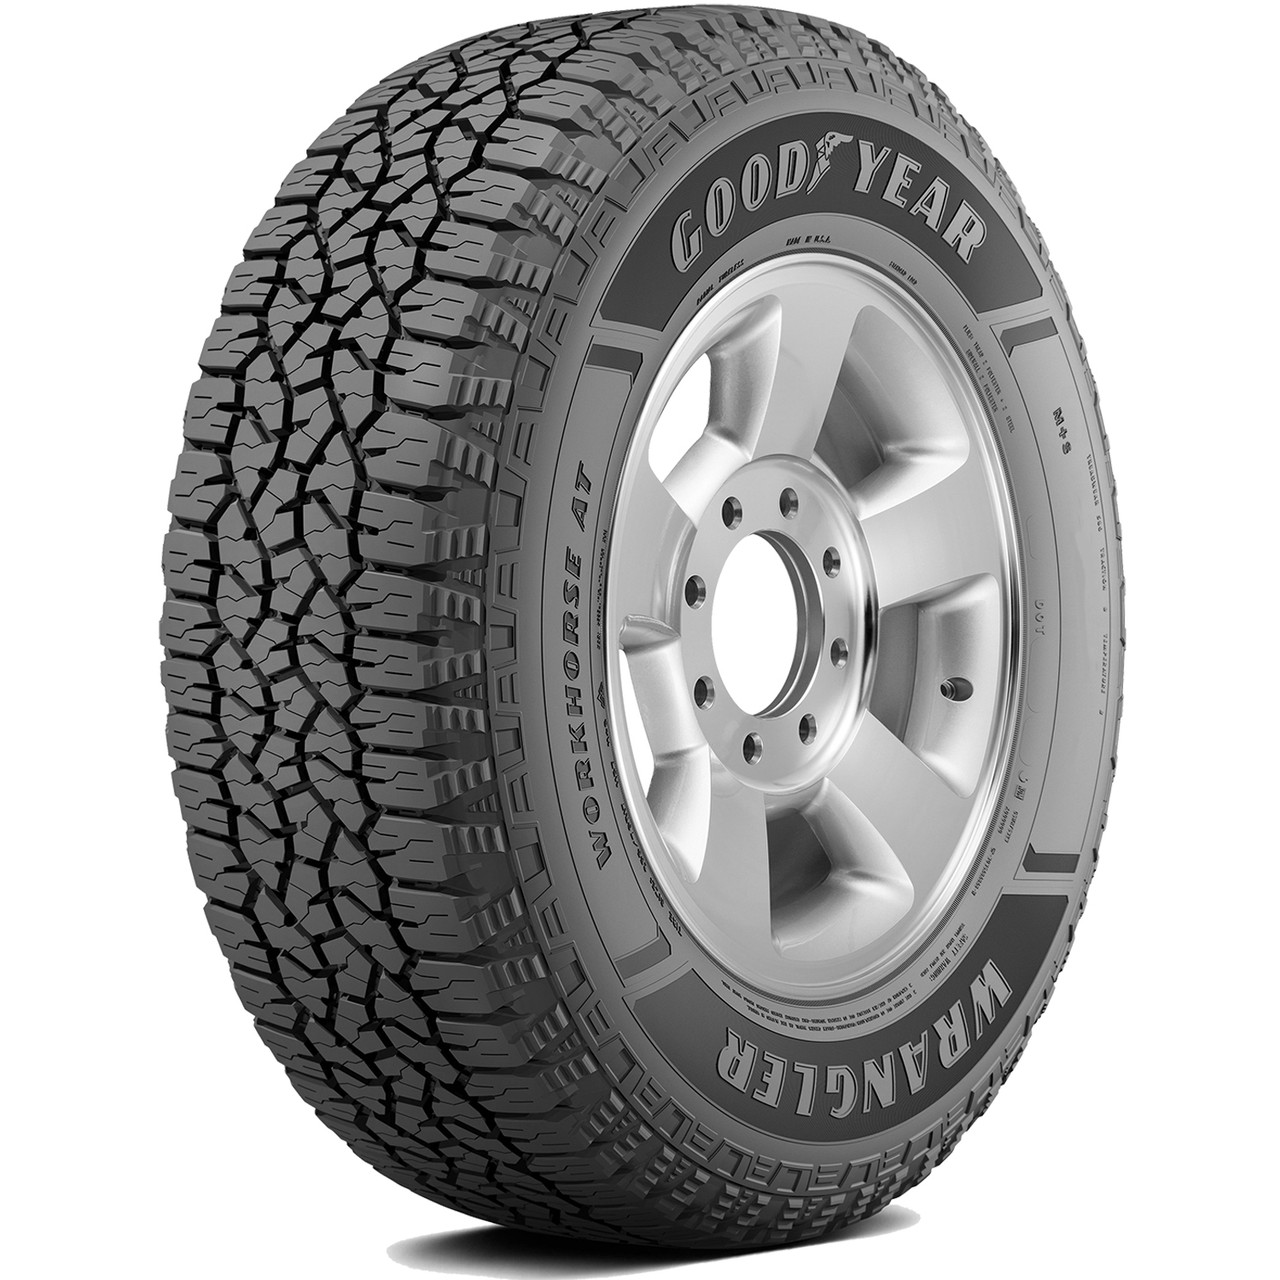 Goodyear Wrangler Workhorse AT LT 245/75R17 121/118S E (10 Ply) A/T All  Terrain